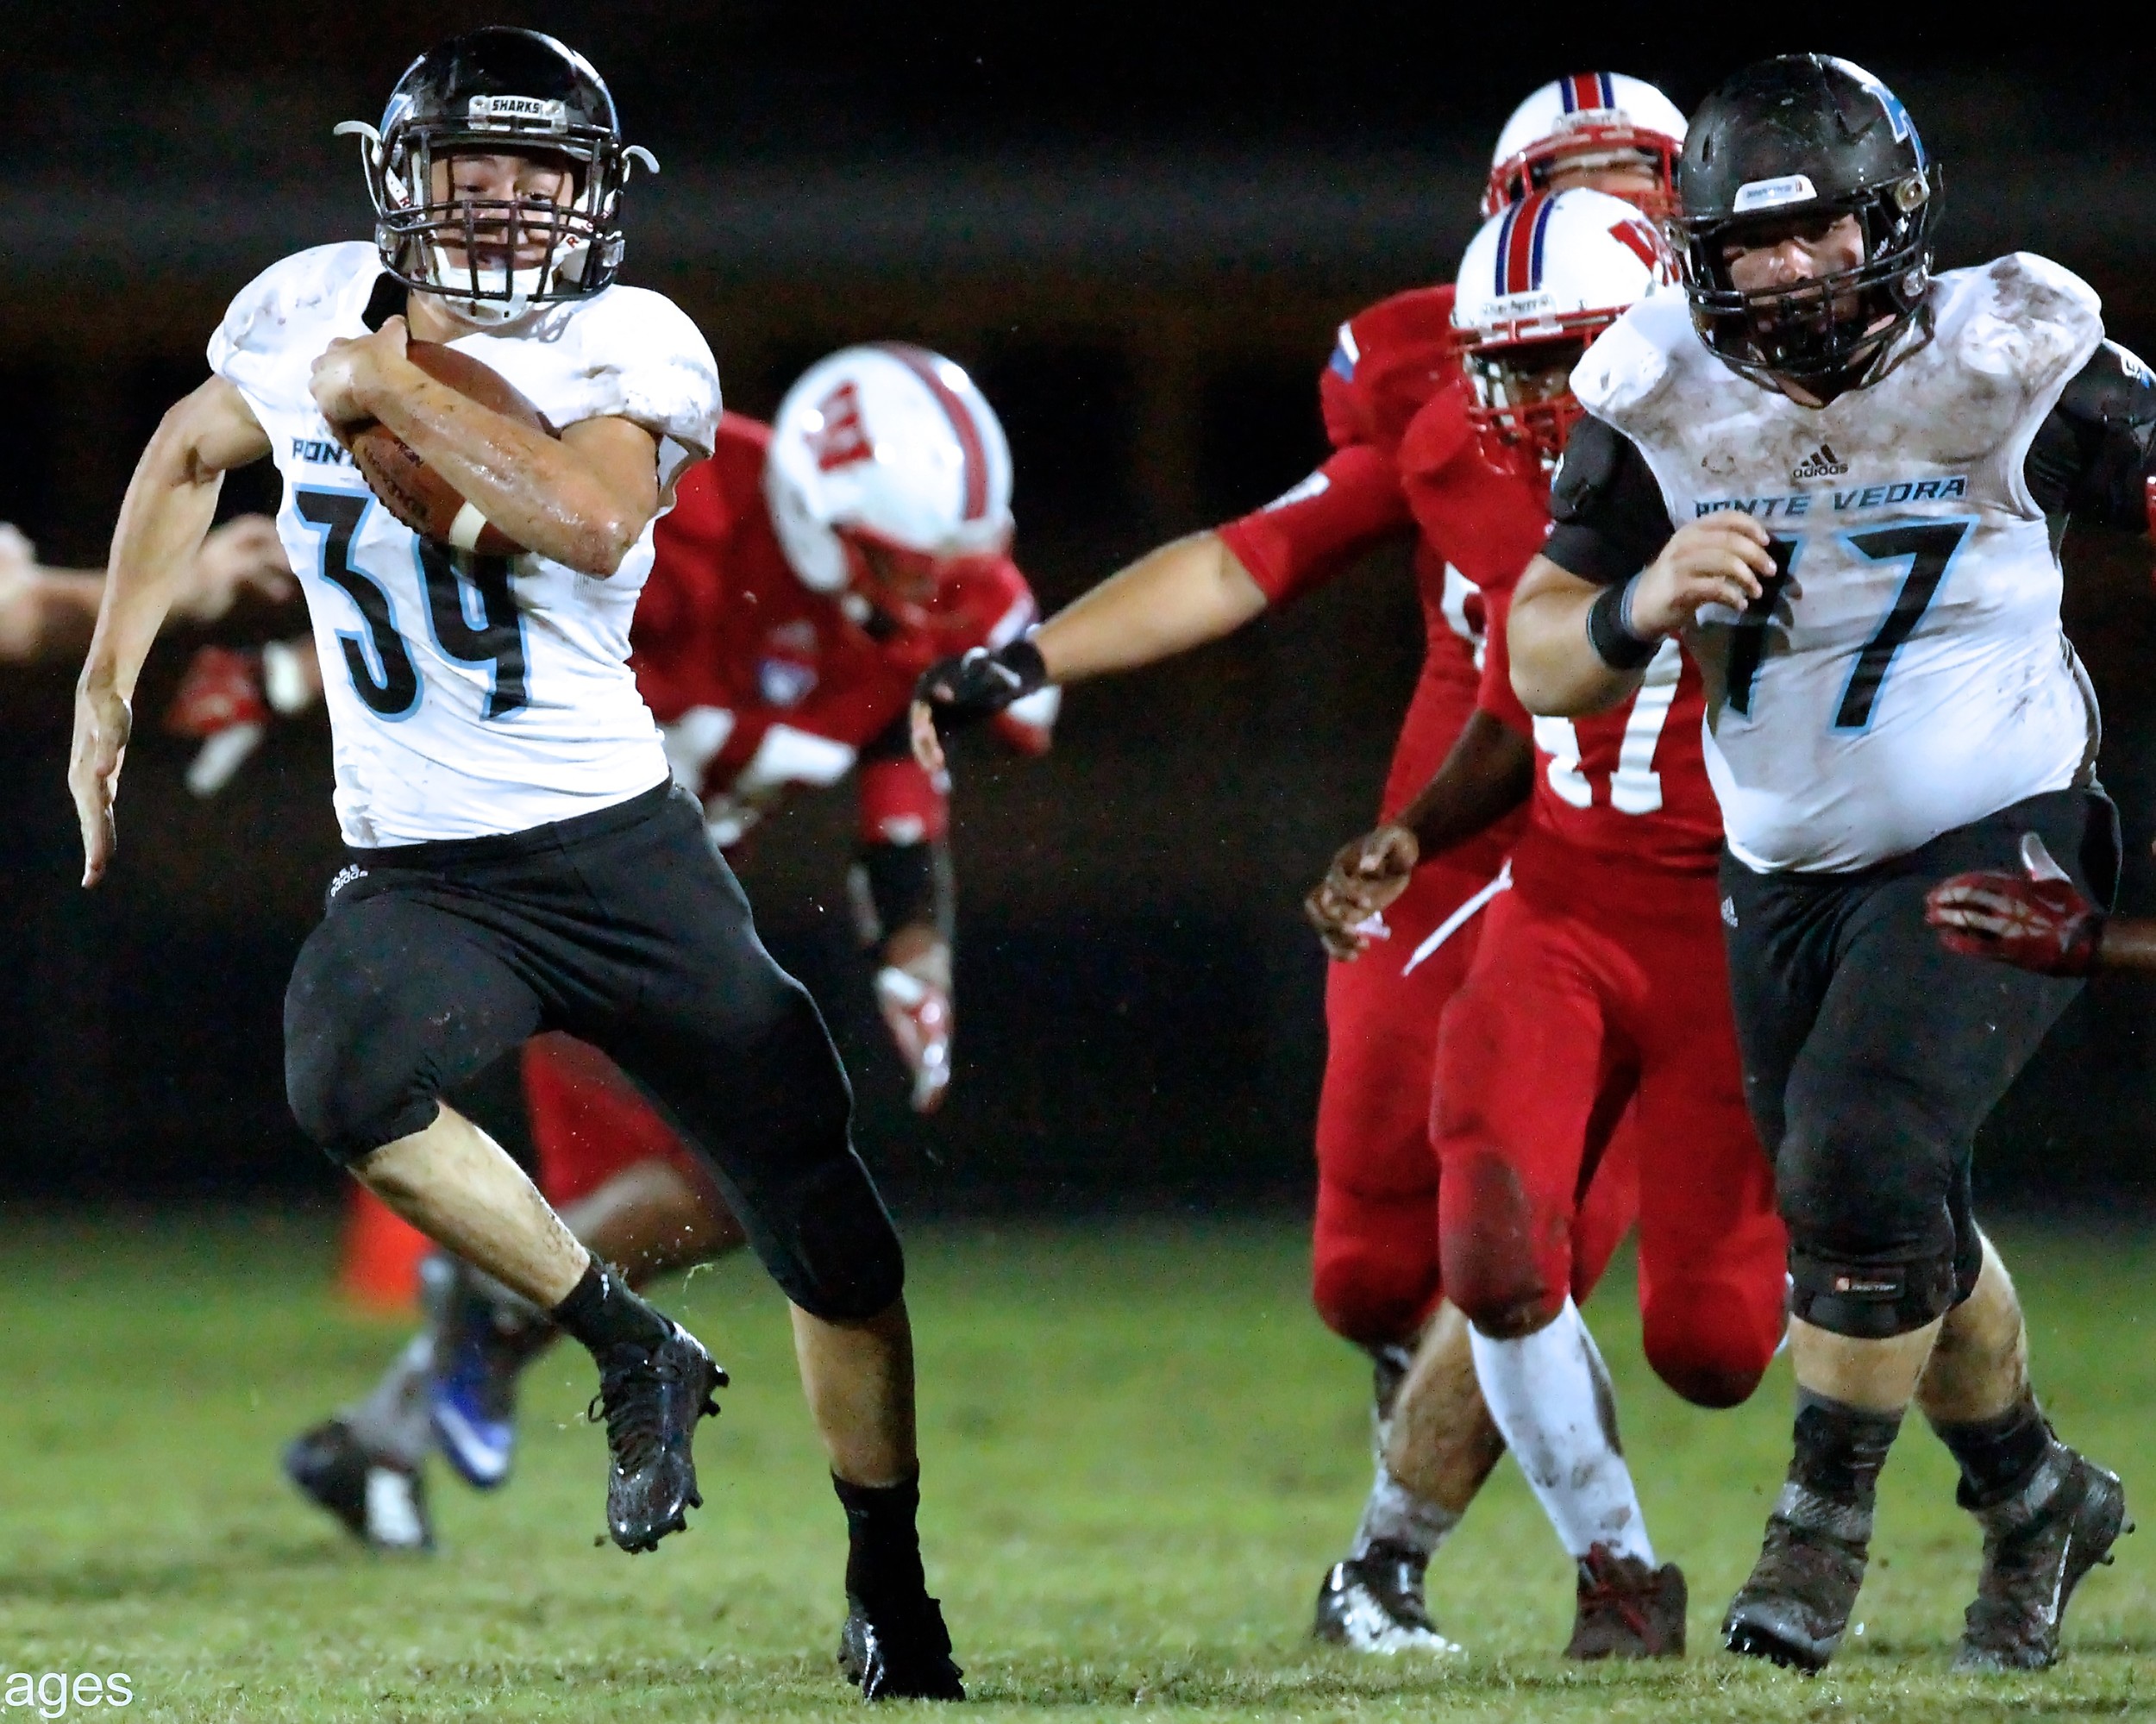 #39 Zach King runs for a Shark touchdown with #77 Taylor Montroy as an escort.